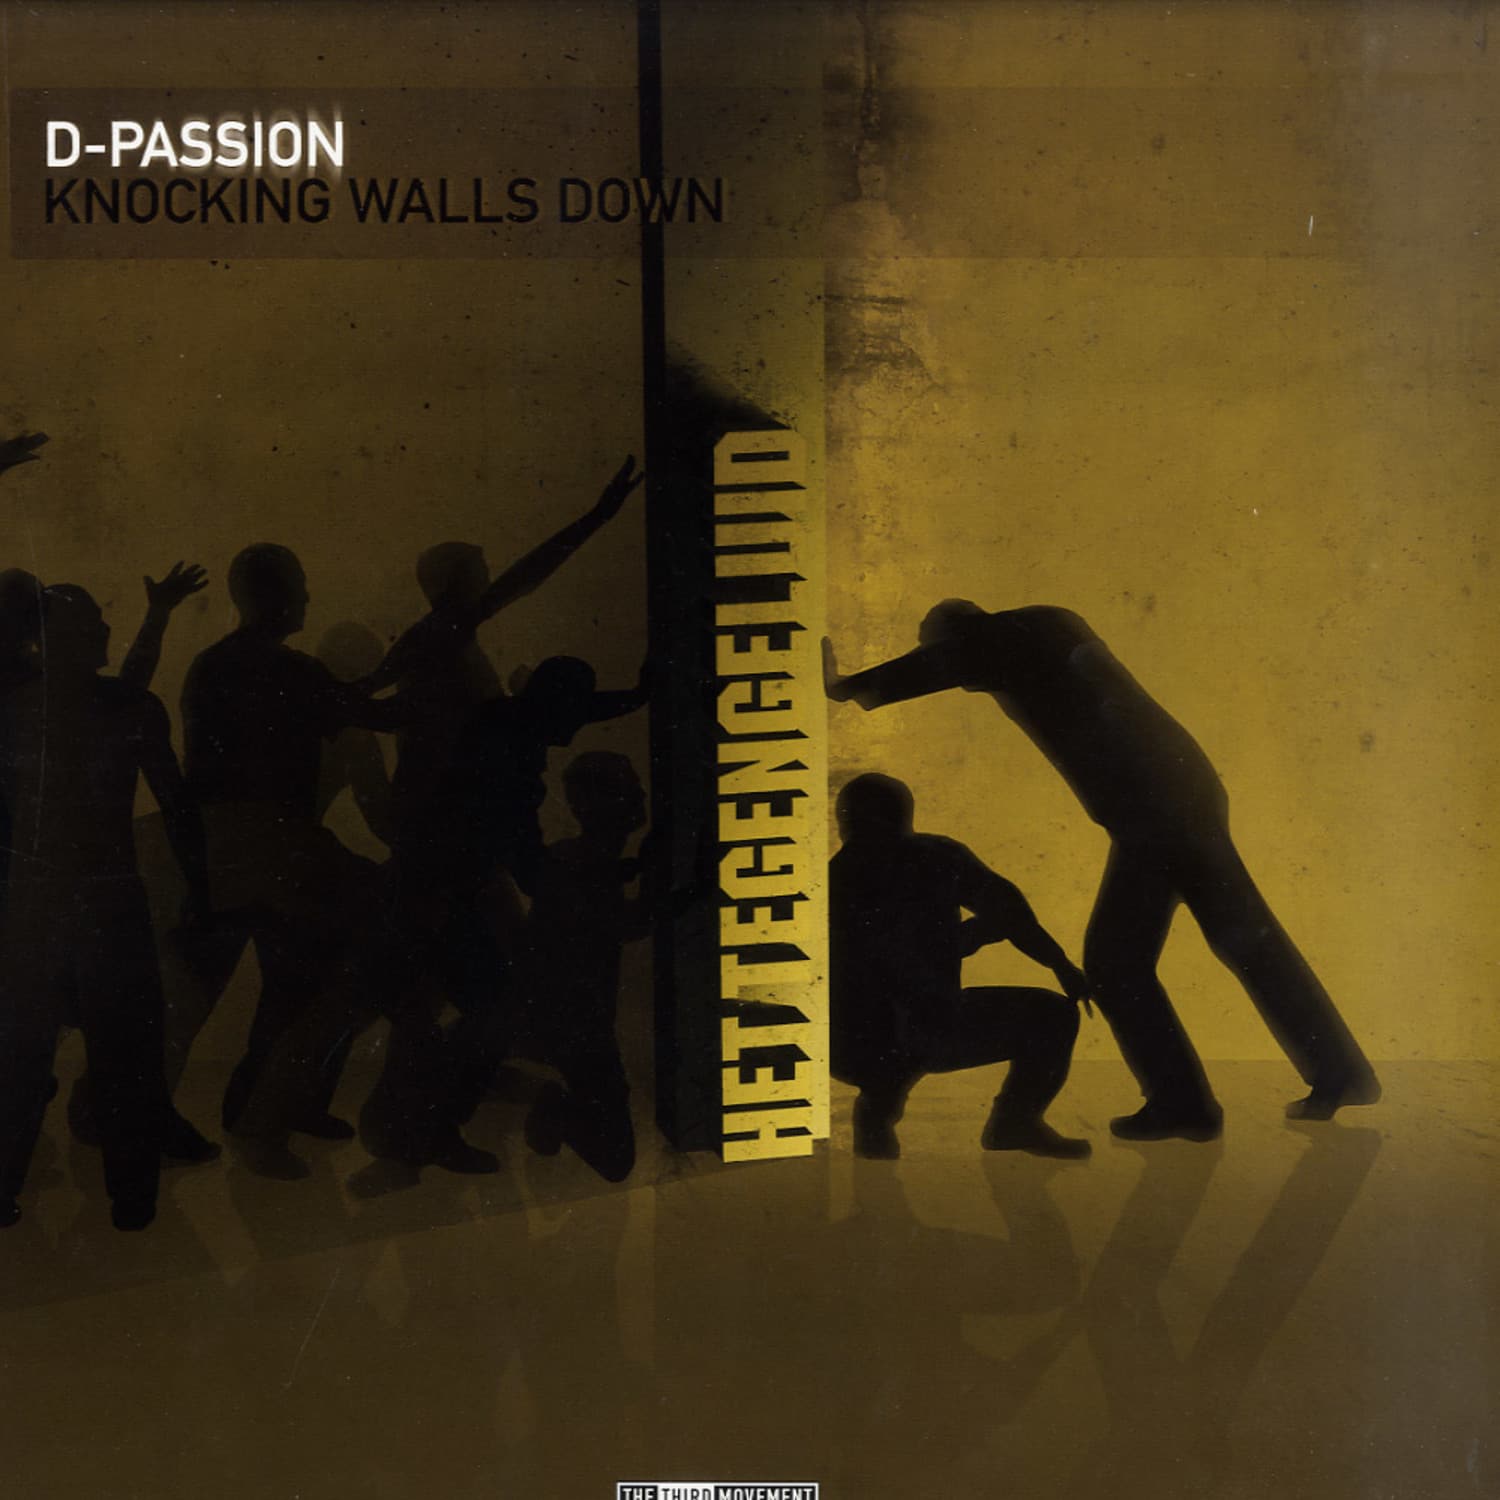 D-Passion - KNOCKING WALLS DOWN